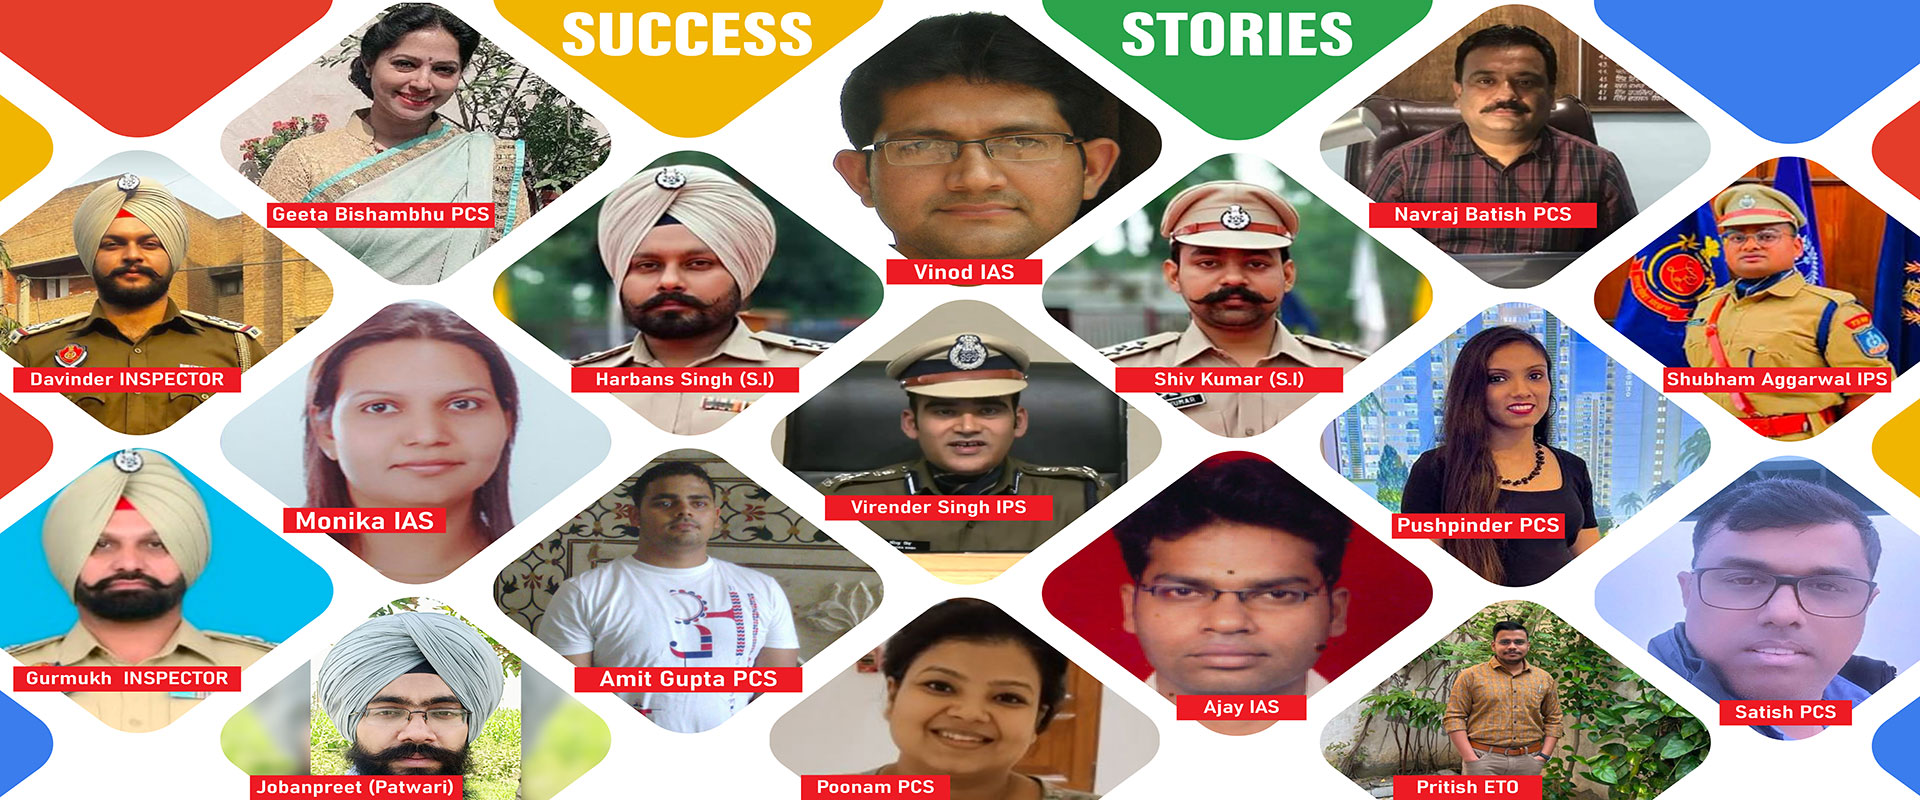 Vashisth-success-stories-poster-7-by-3-01